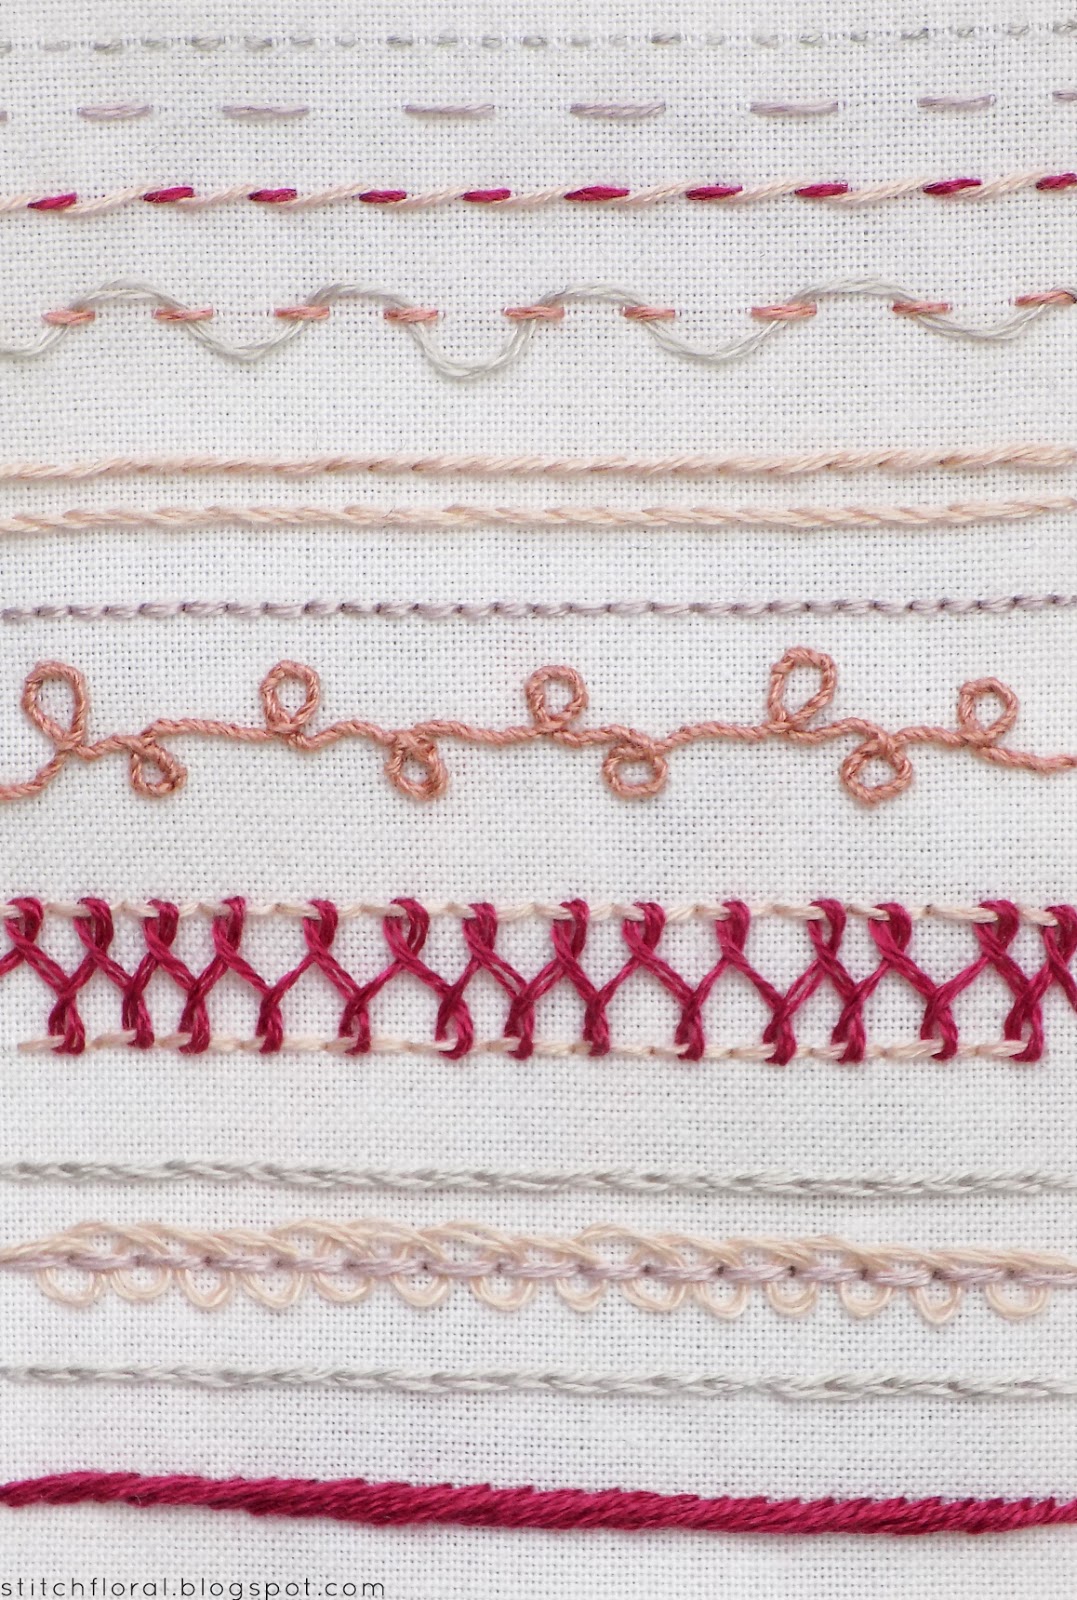 Line stitches and their variations: sampler